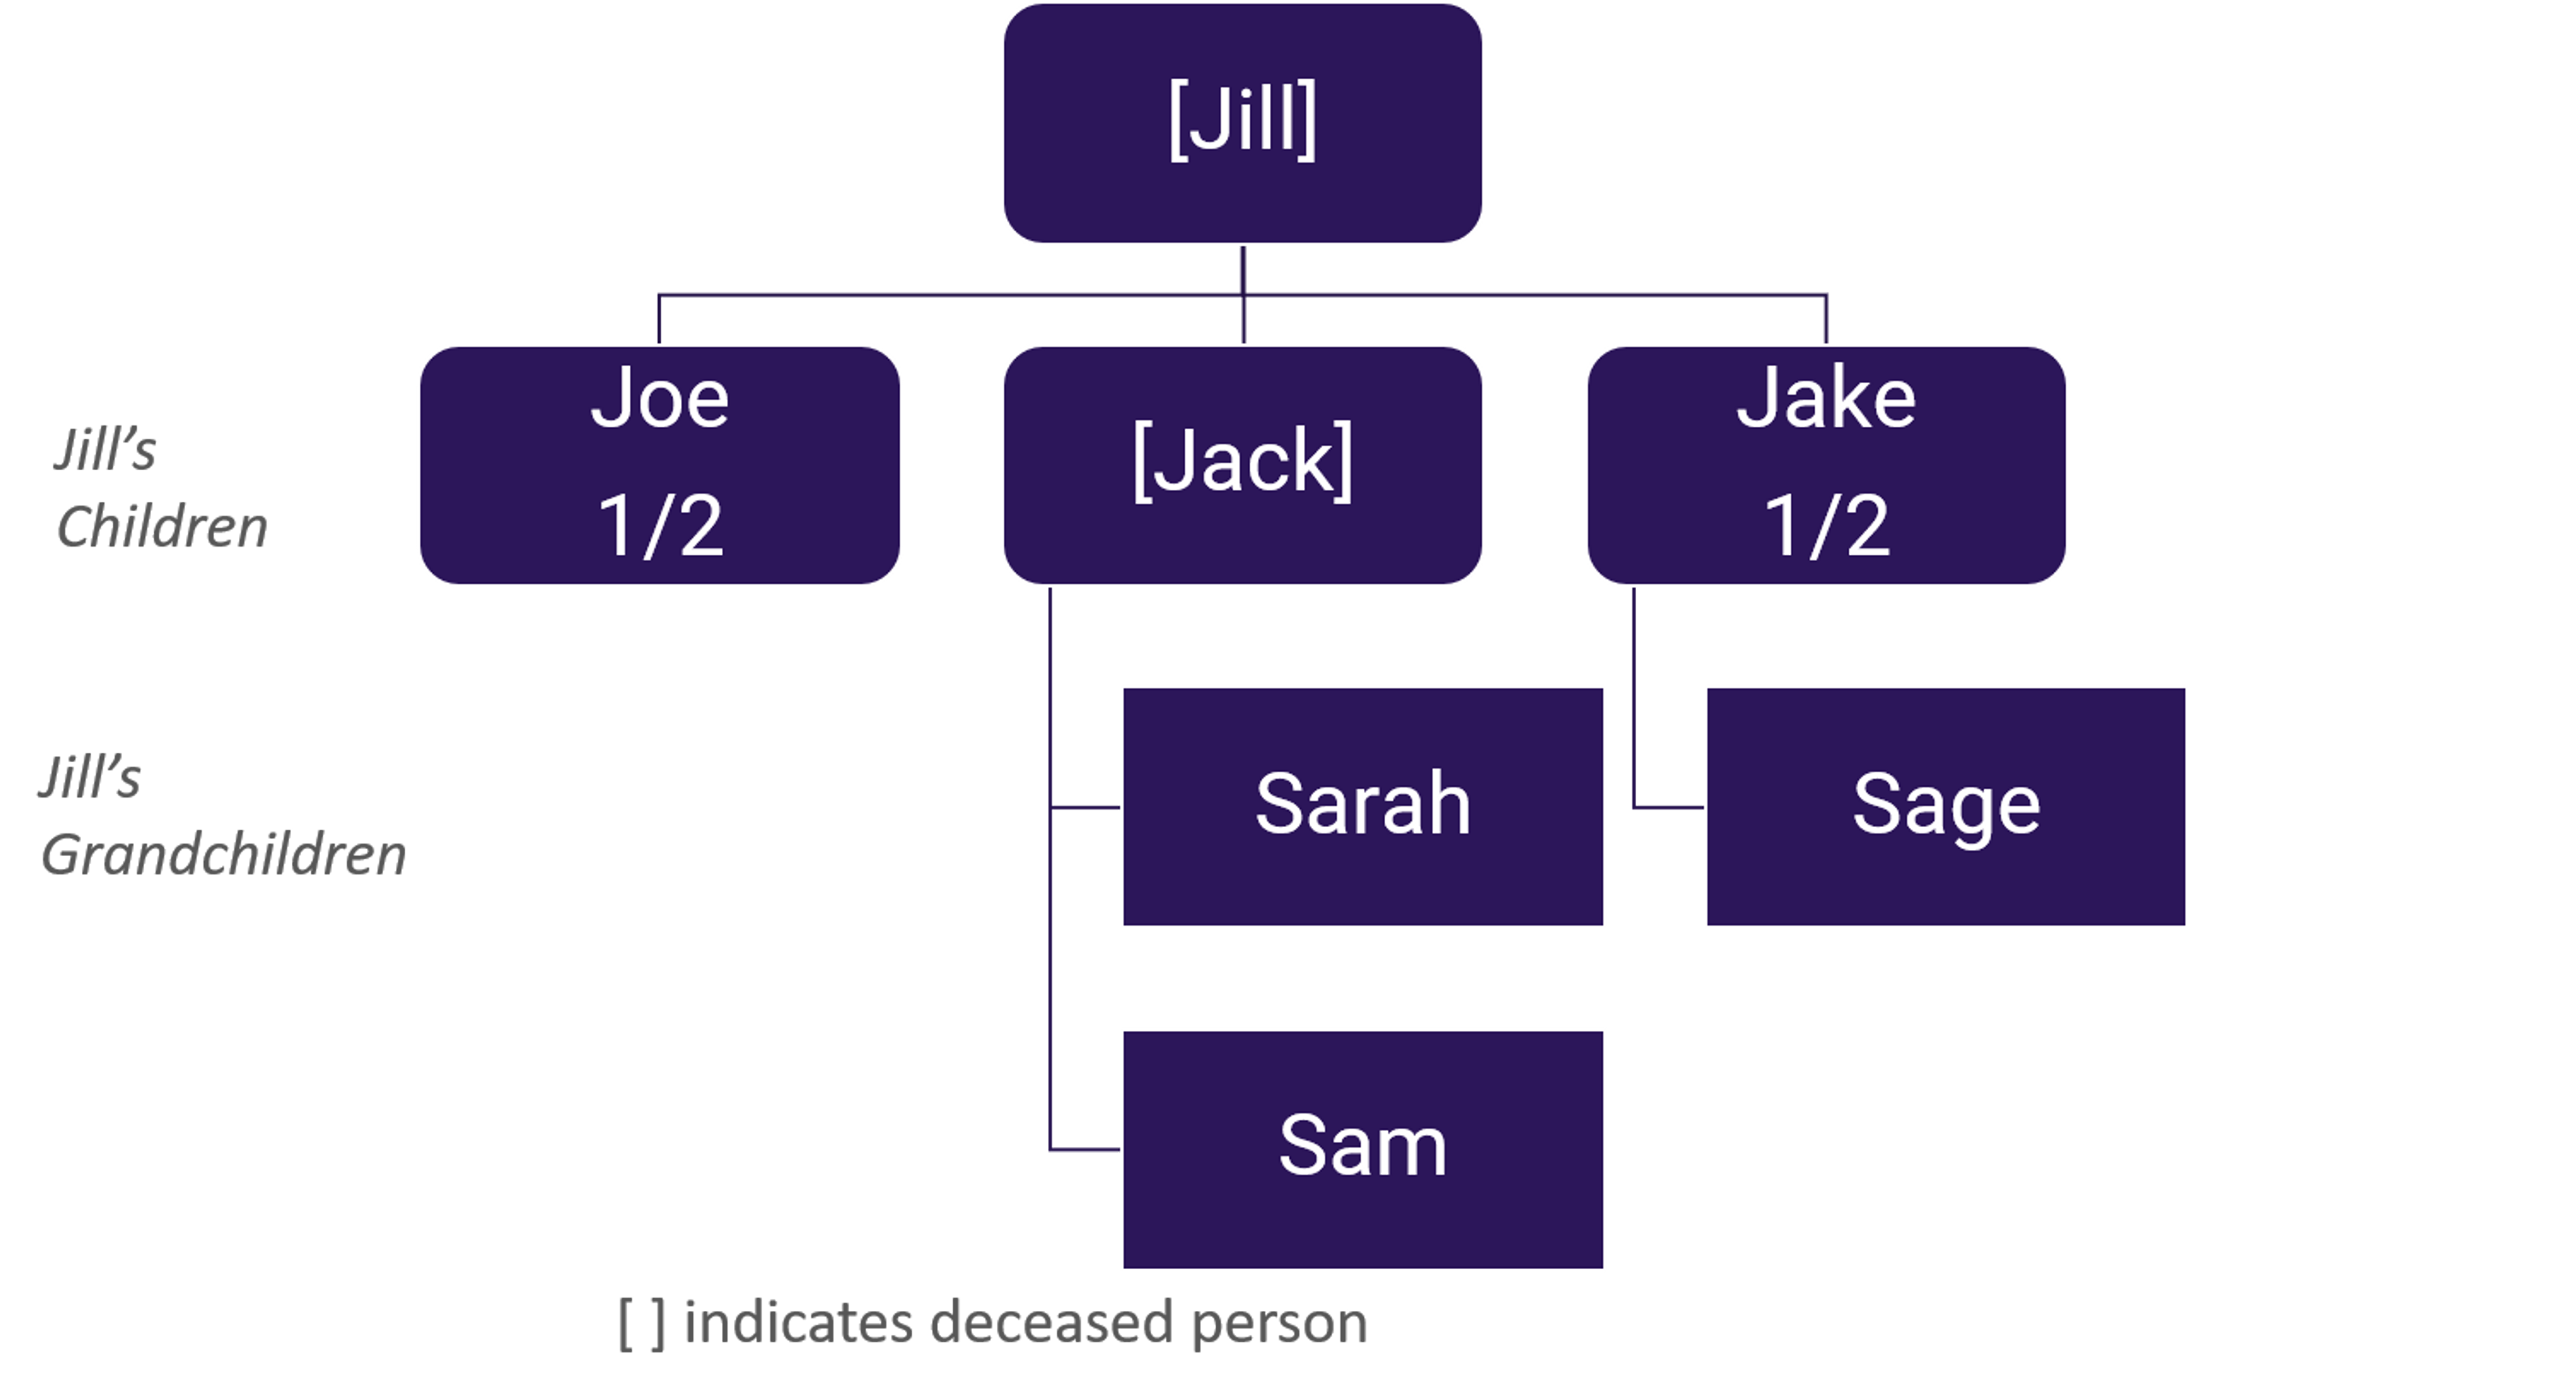 diagram showing the two surviving members of the class, Joe and Jake, inheriting the deceased member's share